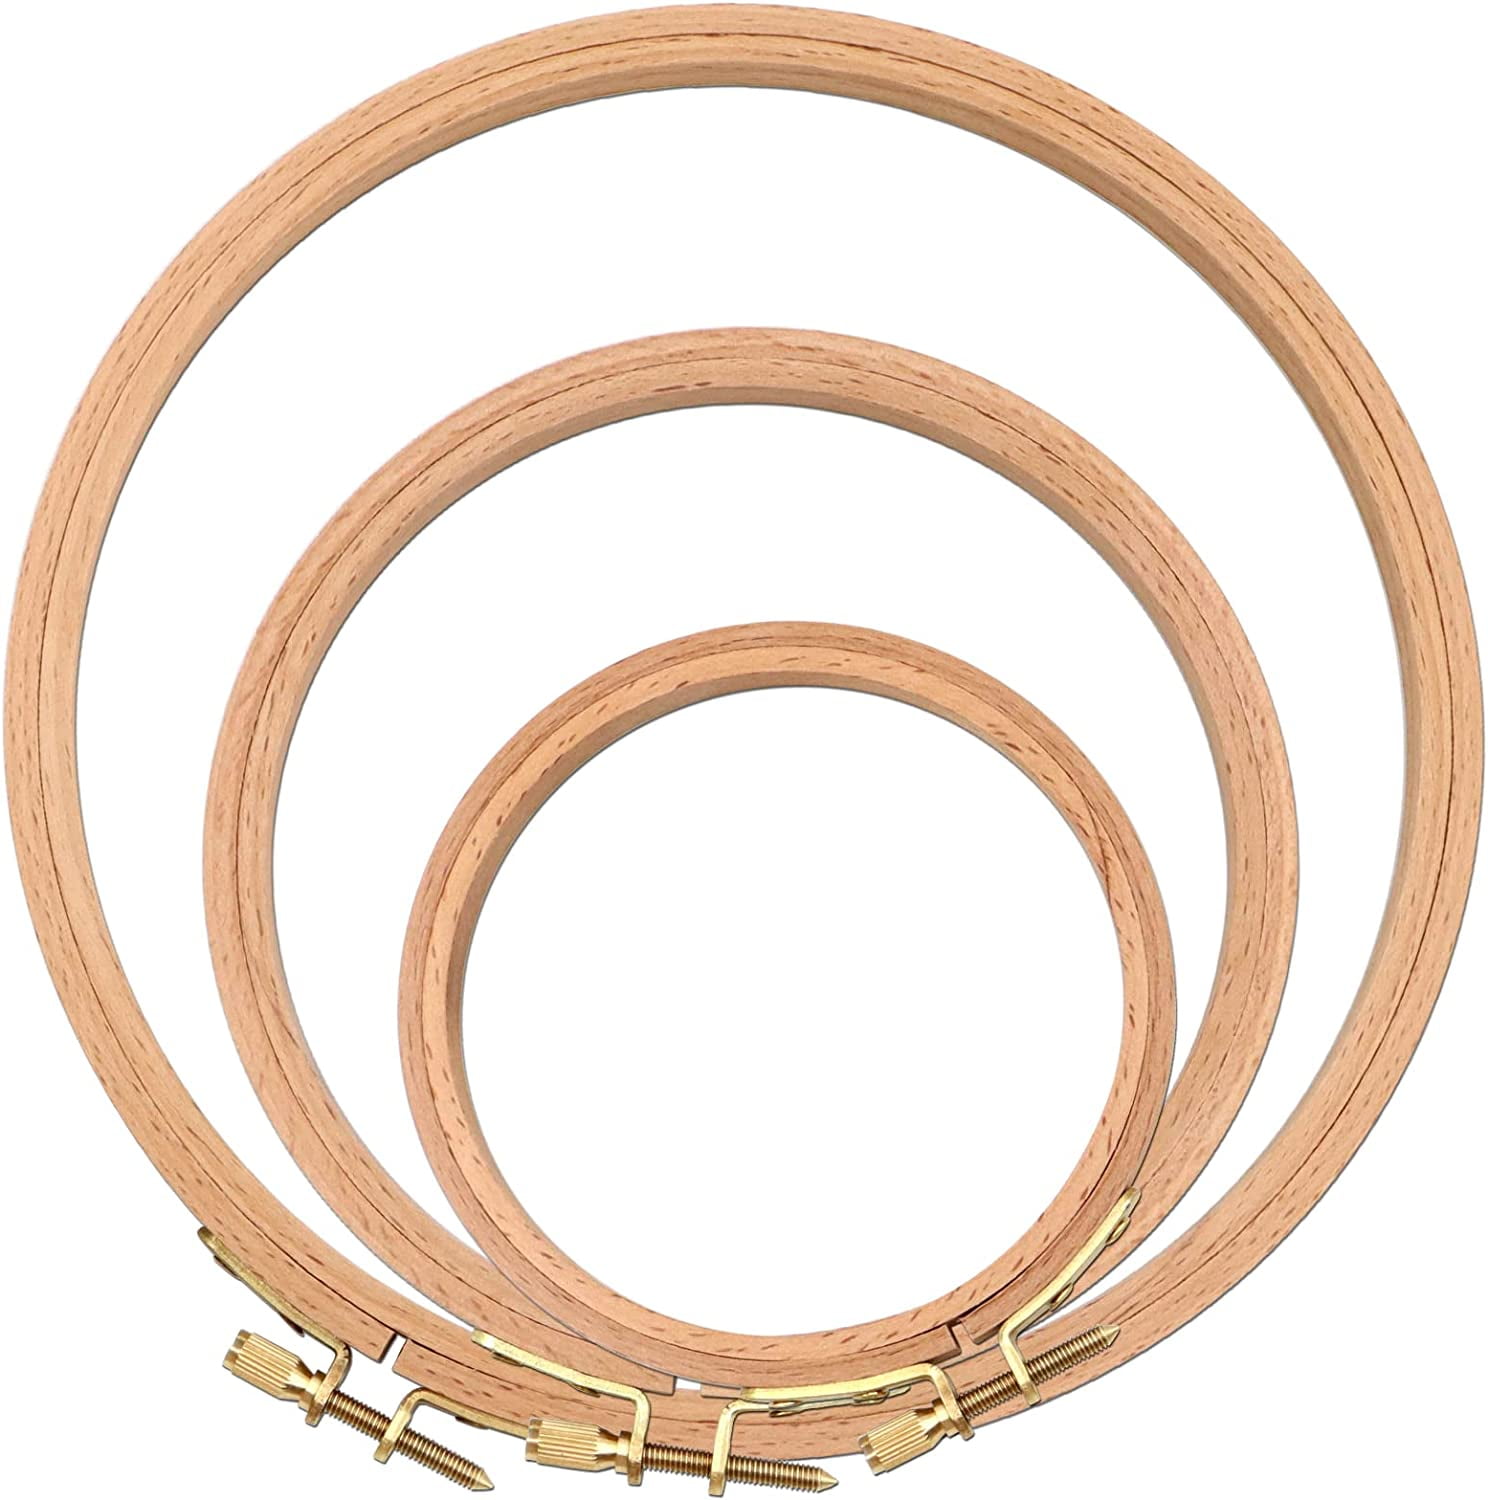 Onepine 3 Pieces Embroidery Hoop Bamboo Circle Cross Stitch Hoop Ring 6 inch to 8.3 inch for DIY Art Craft 